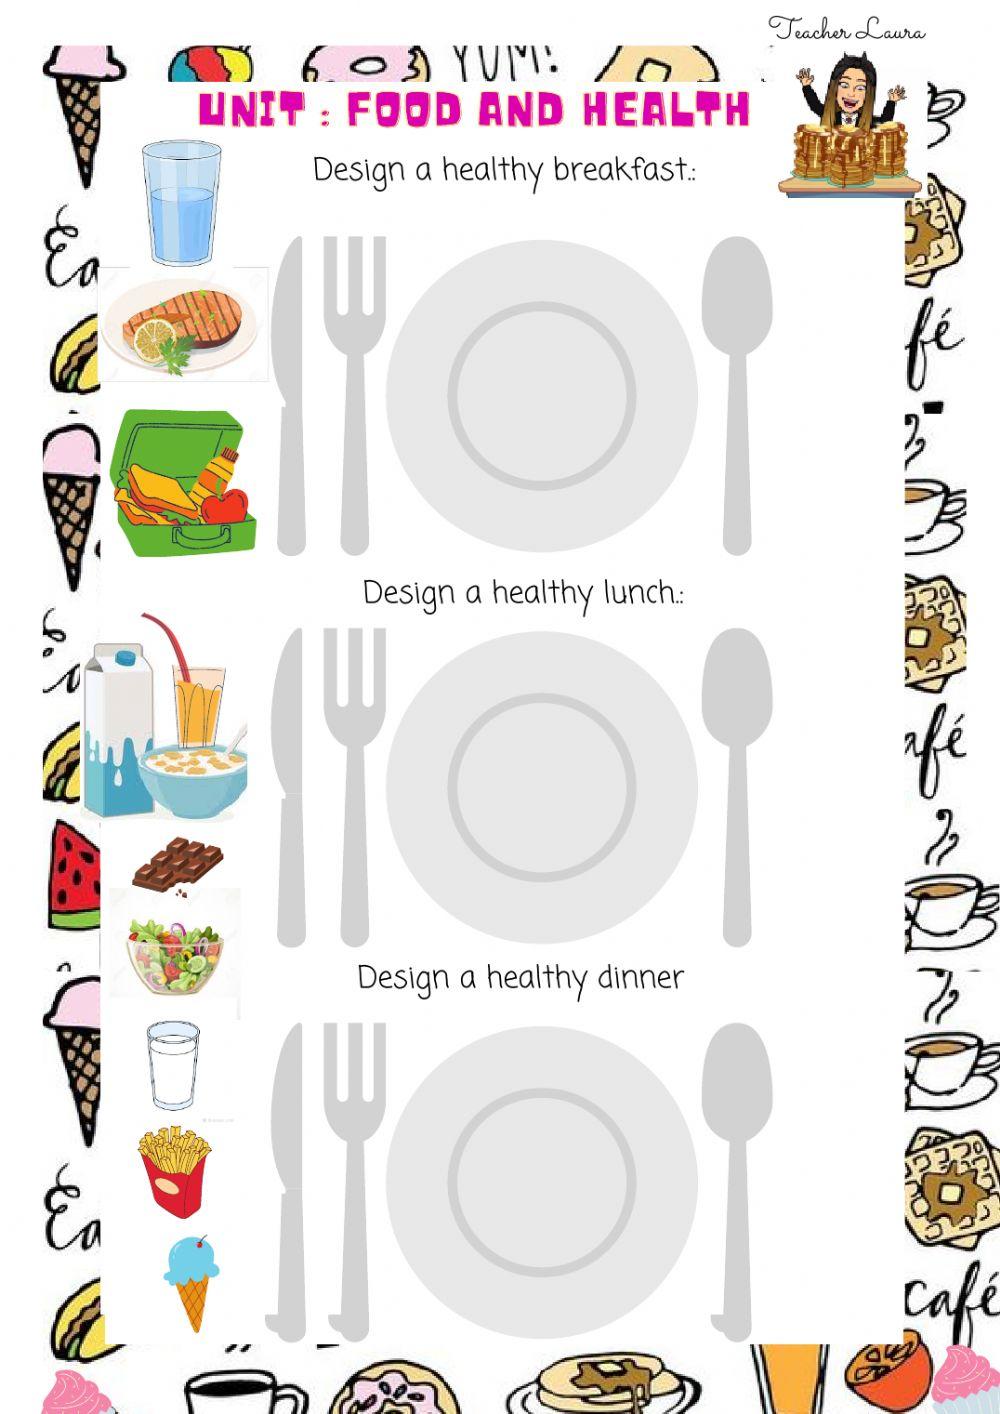 Design a healthy meal